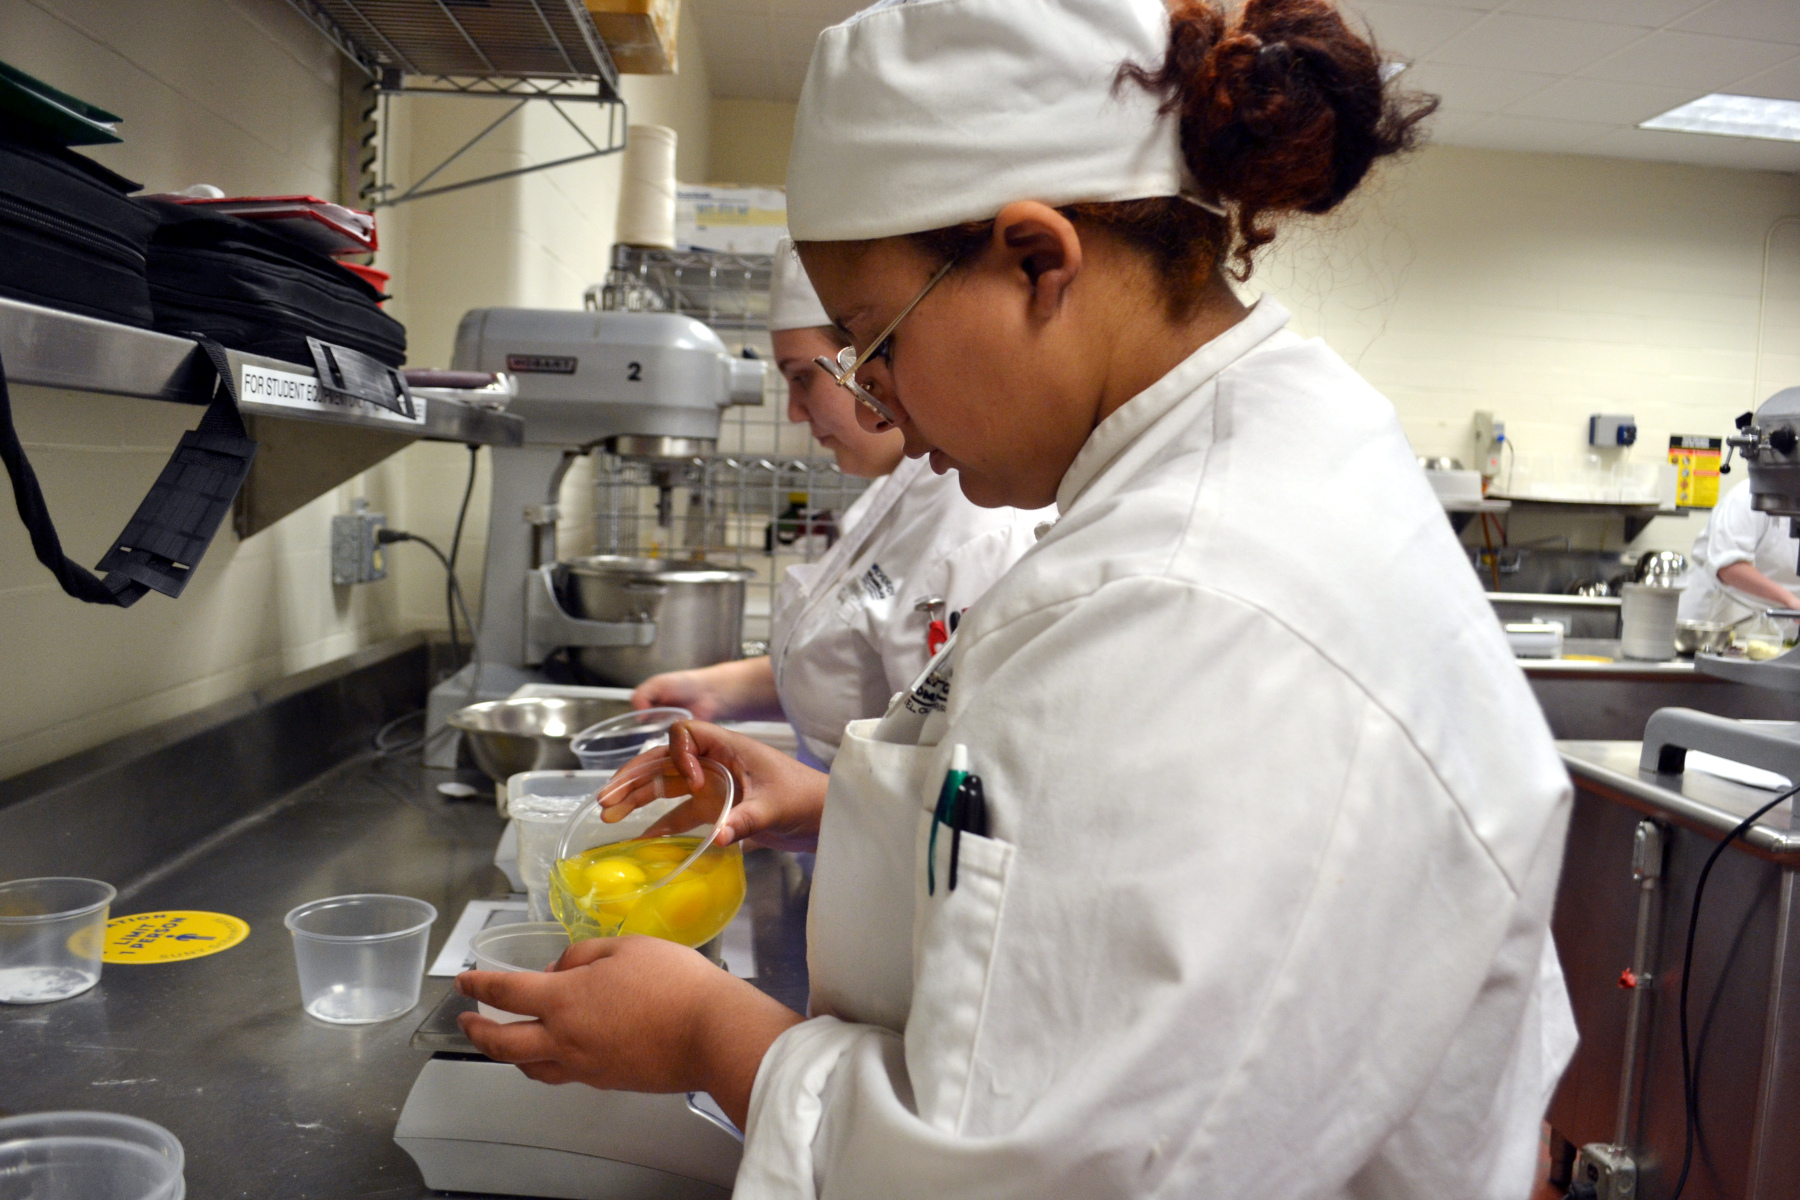 Student separating eggs to make pastries in Pastry Lab